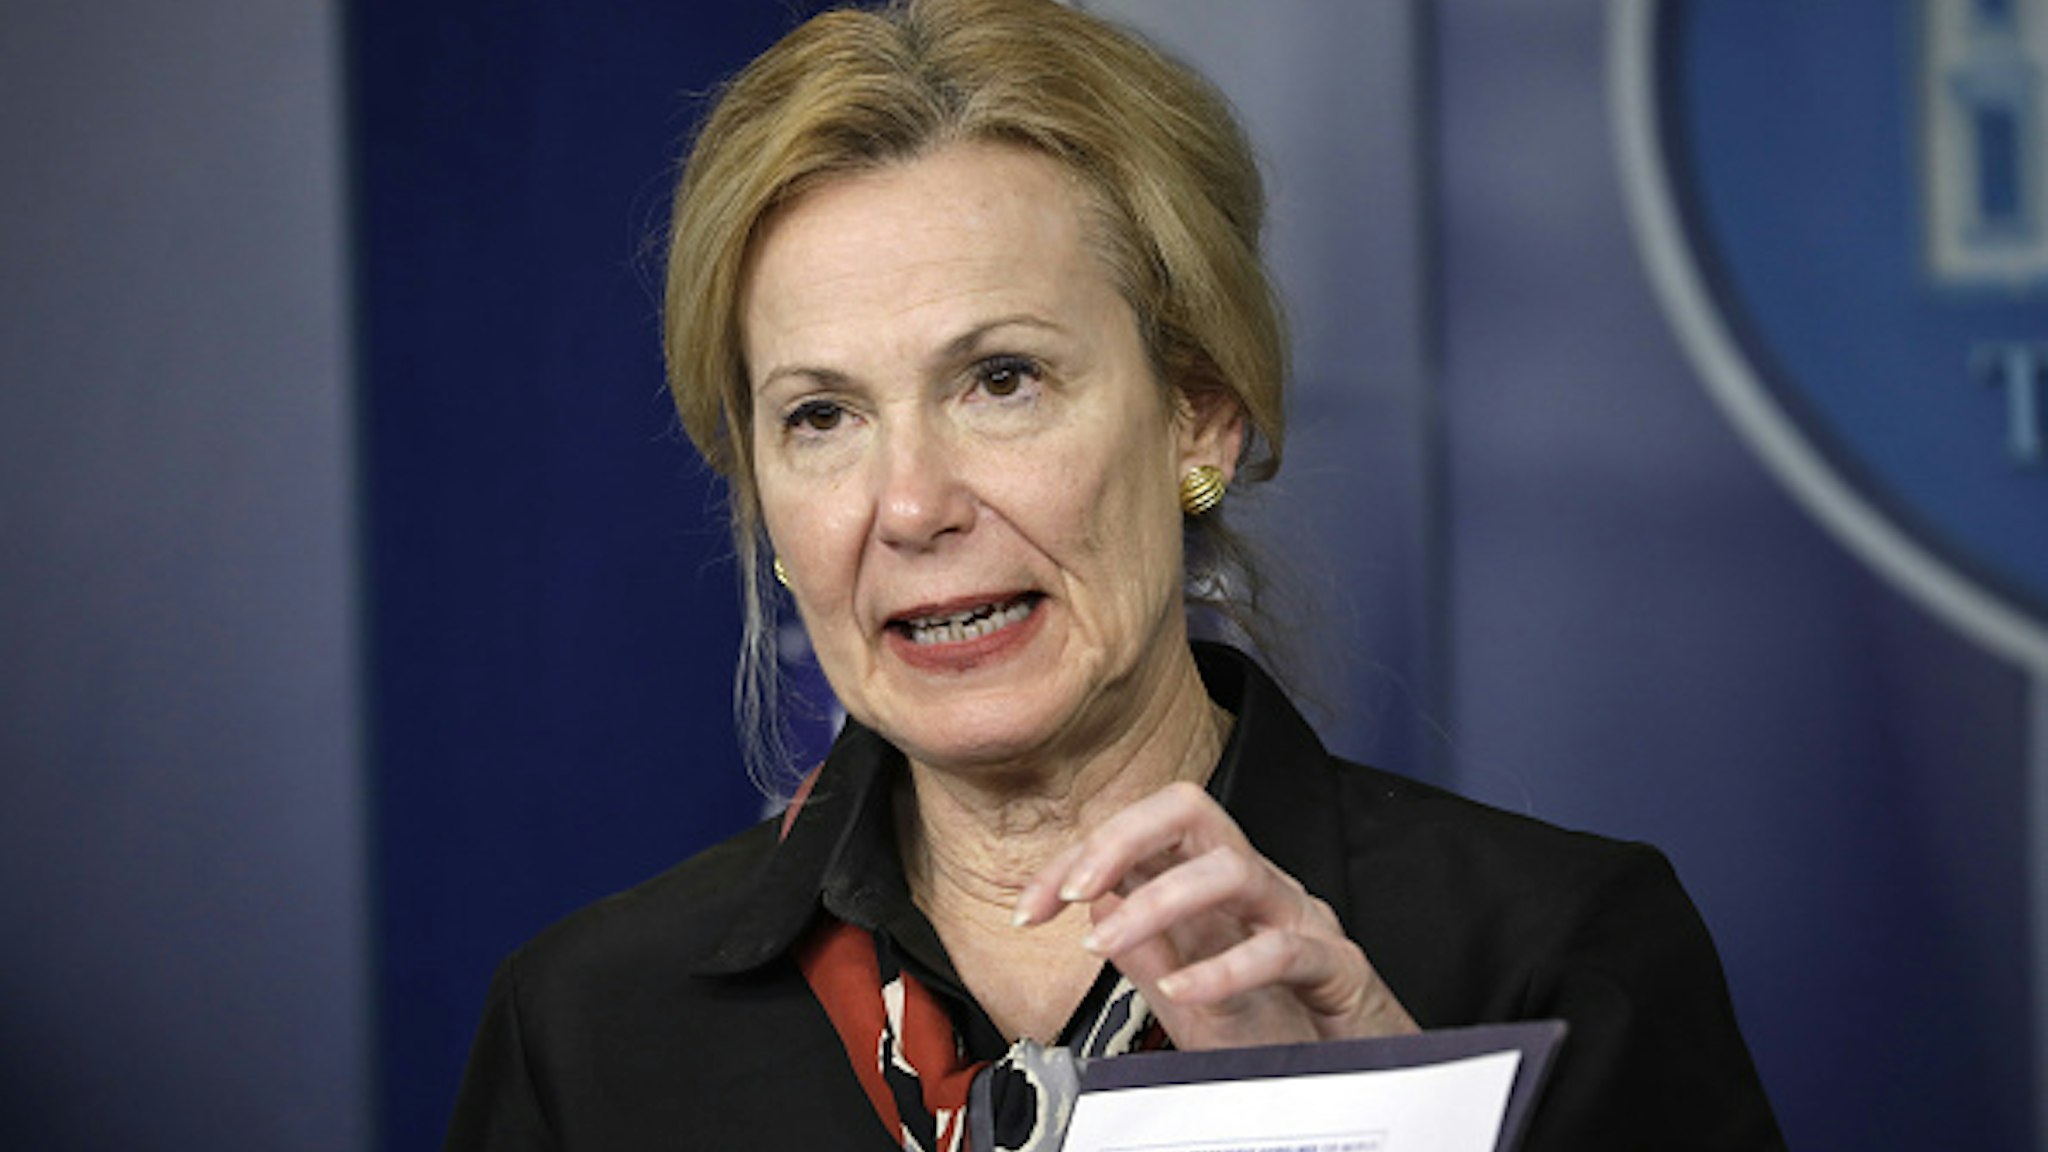 Deborah Birx, coronavirus response coordinator, speaks during a Coronavirus Task Force news conference at the White House in Washington, D.C., U.S., on Thursday, March 26, 2020. President Donald Trump claimed that U.S. unemployment claims would have been even worse if he hadnt restricted travel from China in late January to try to stave off the coronavirus outbreak.